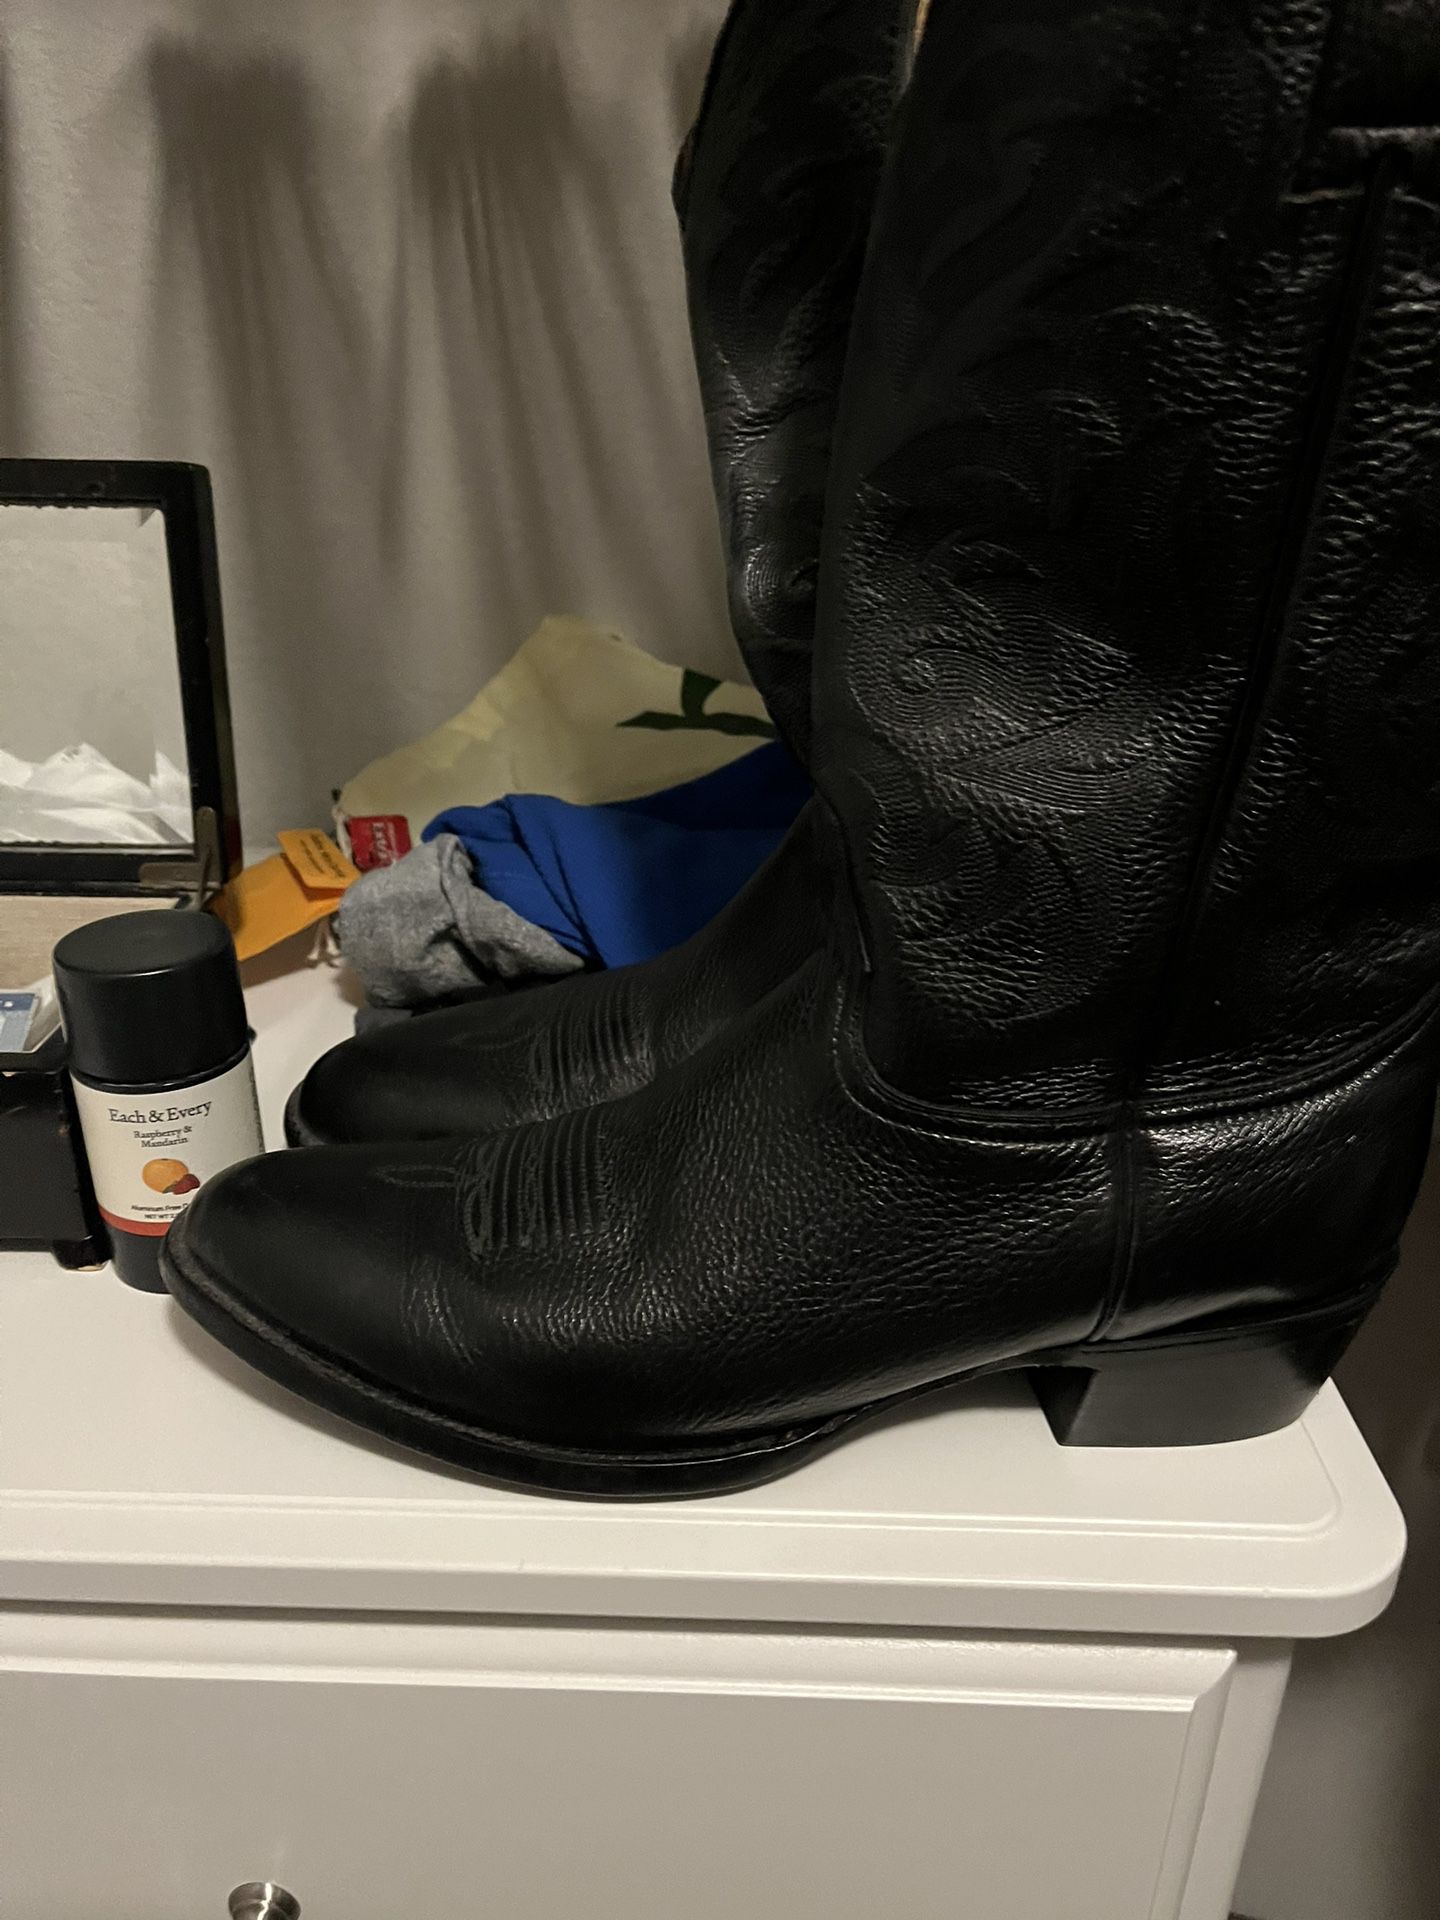 Cody James Boots